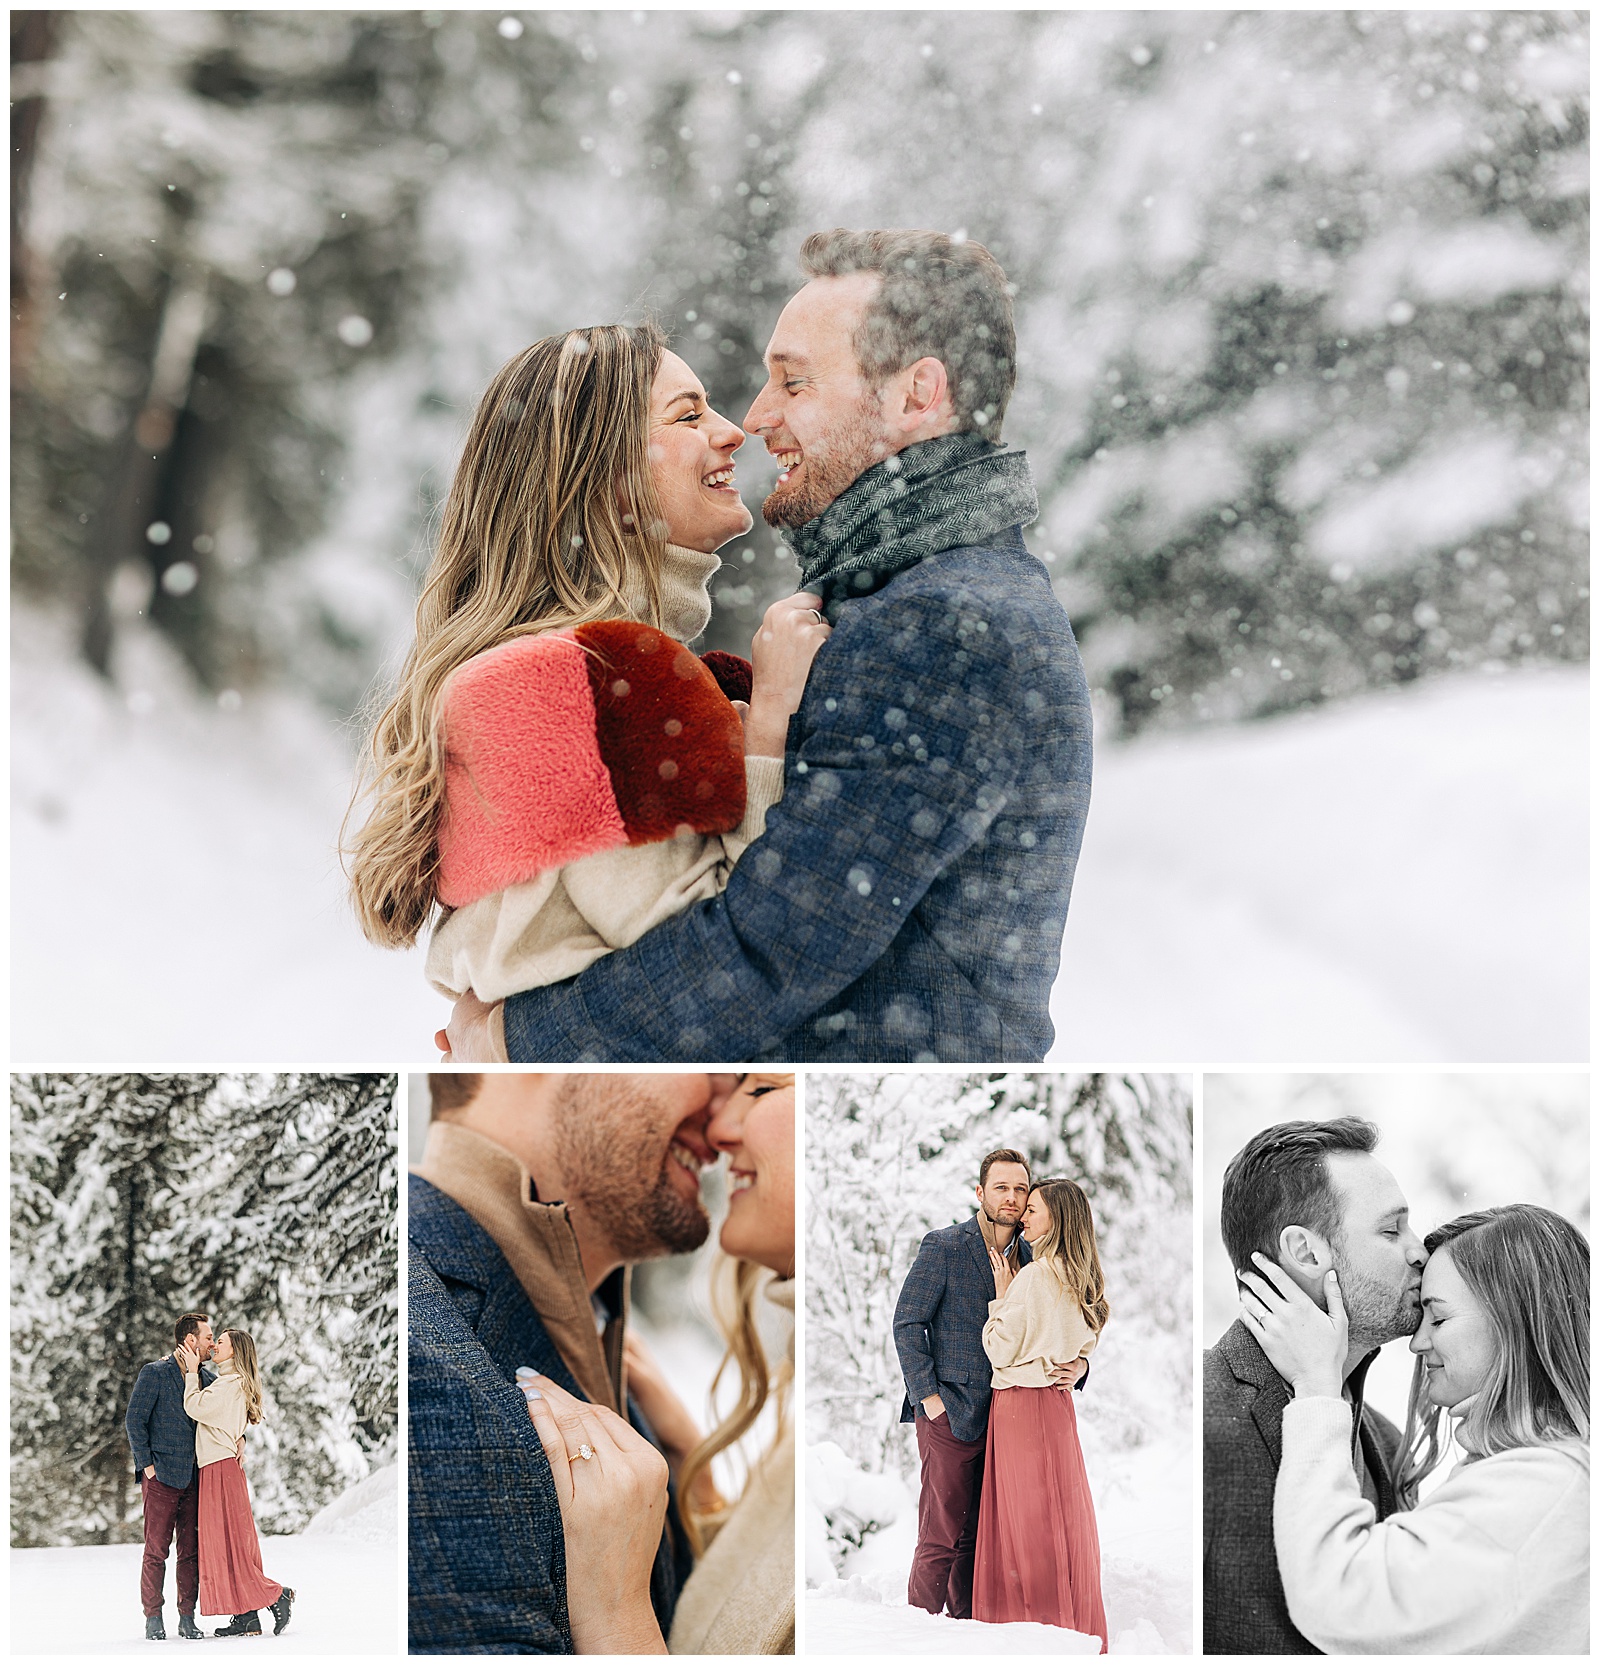 Winter Styling Tips for Engagement Sessions